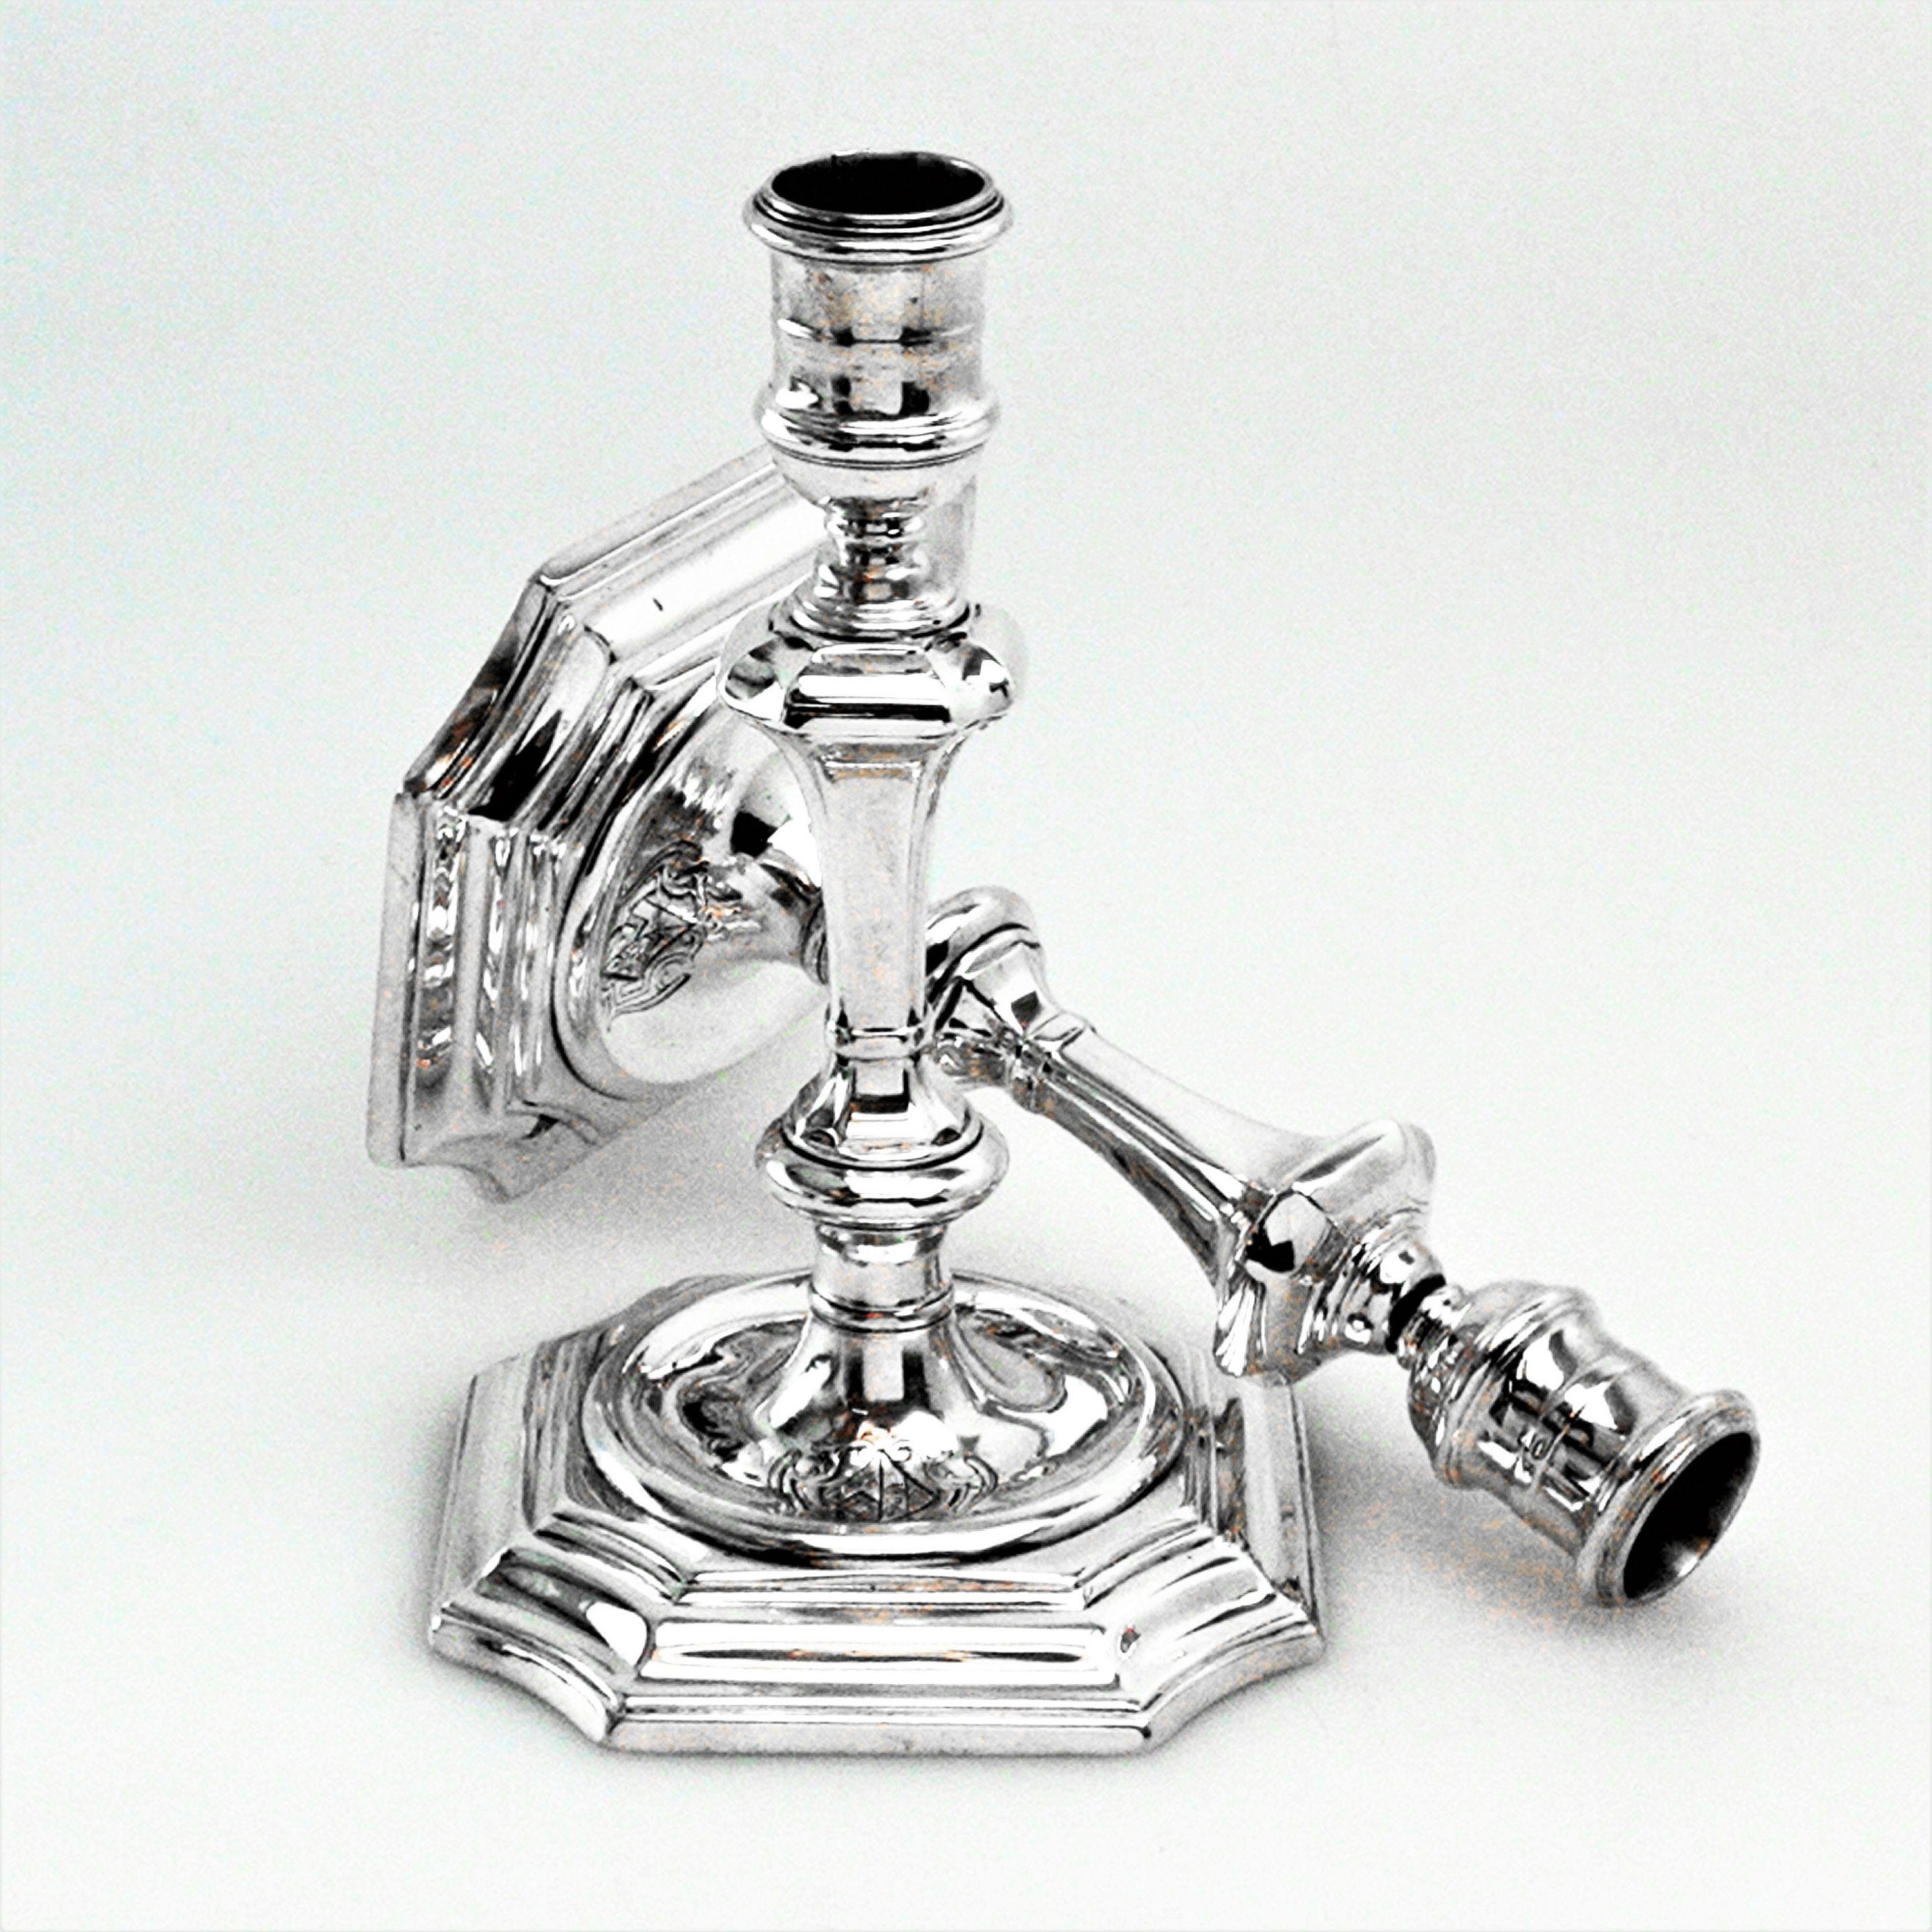 A pair of classic George I Antique sterling Silver Candlesticks standing on shaped stepped square based with a sunken well in the centre. Each Candlestick has a shaped knopped column and elegant capitals. Each Candlestick has an engraved crest